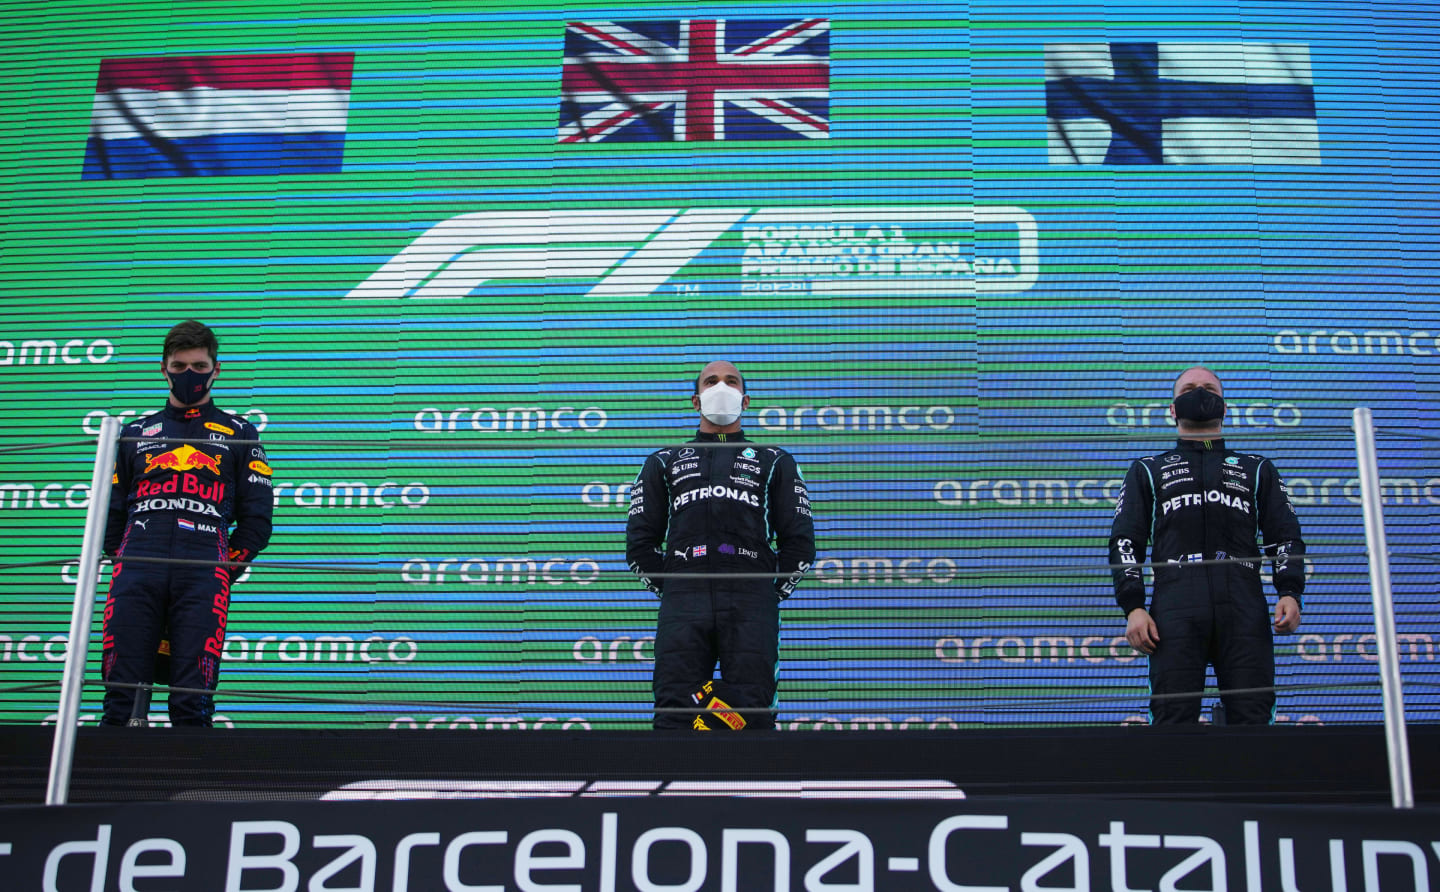 BARCELONA, SPAIN - MAY 09: Second placed Max Verstappen of Netherlands and Red Bull Racing, race winner Lewis Hamilton of Great Britain and Mercedes GP and third placed Valtteri Bottas of Finland and Mercedes GP stand on the podium during the F1 Grand Prix of Spain at Circuit de Barcelona-Catalunya on May 09, 2021 in Barcelona, Spain. (Photo by Emilio Morenatti - Pool/Getty Images)